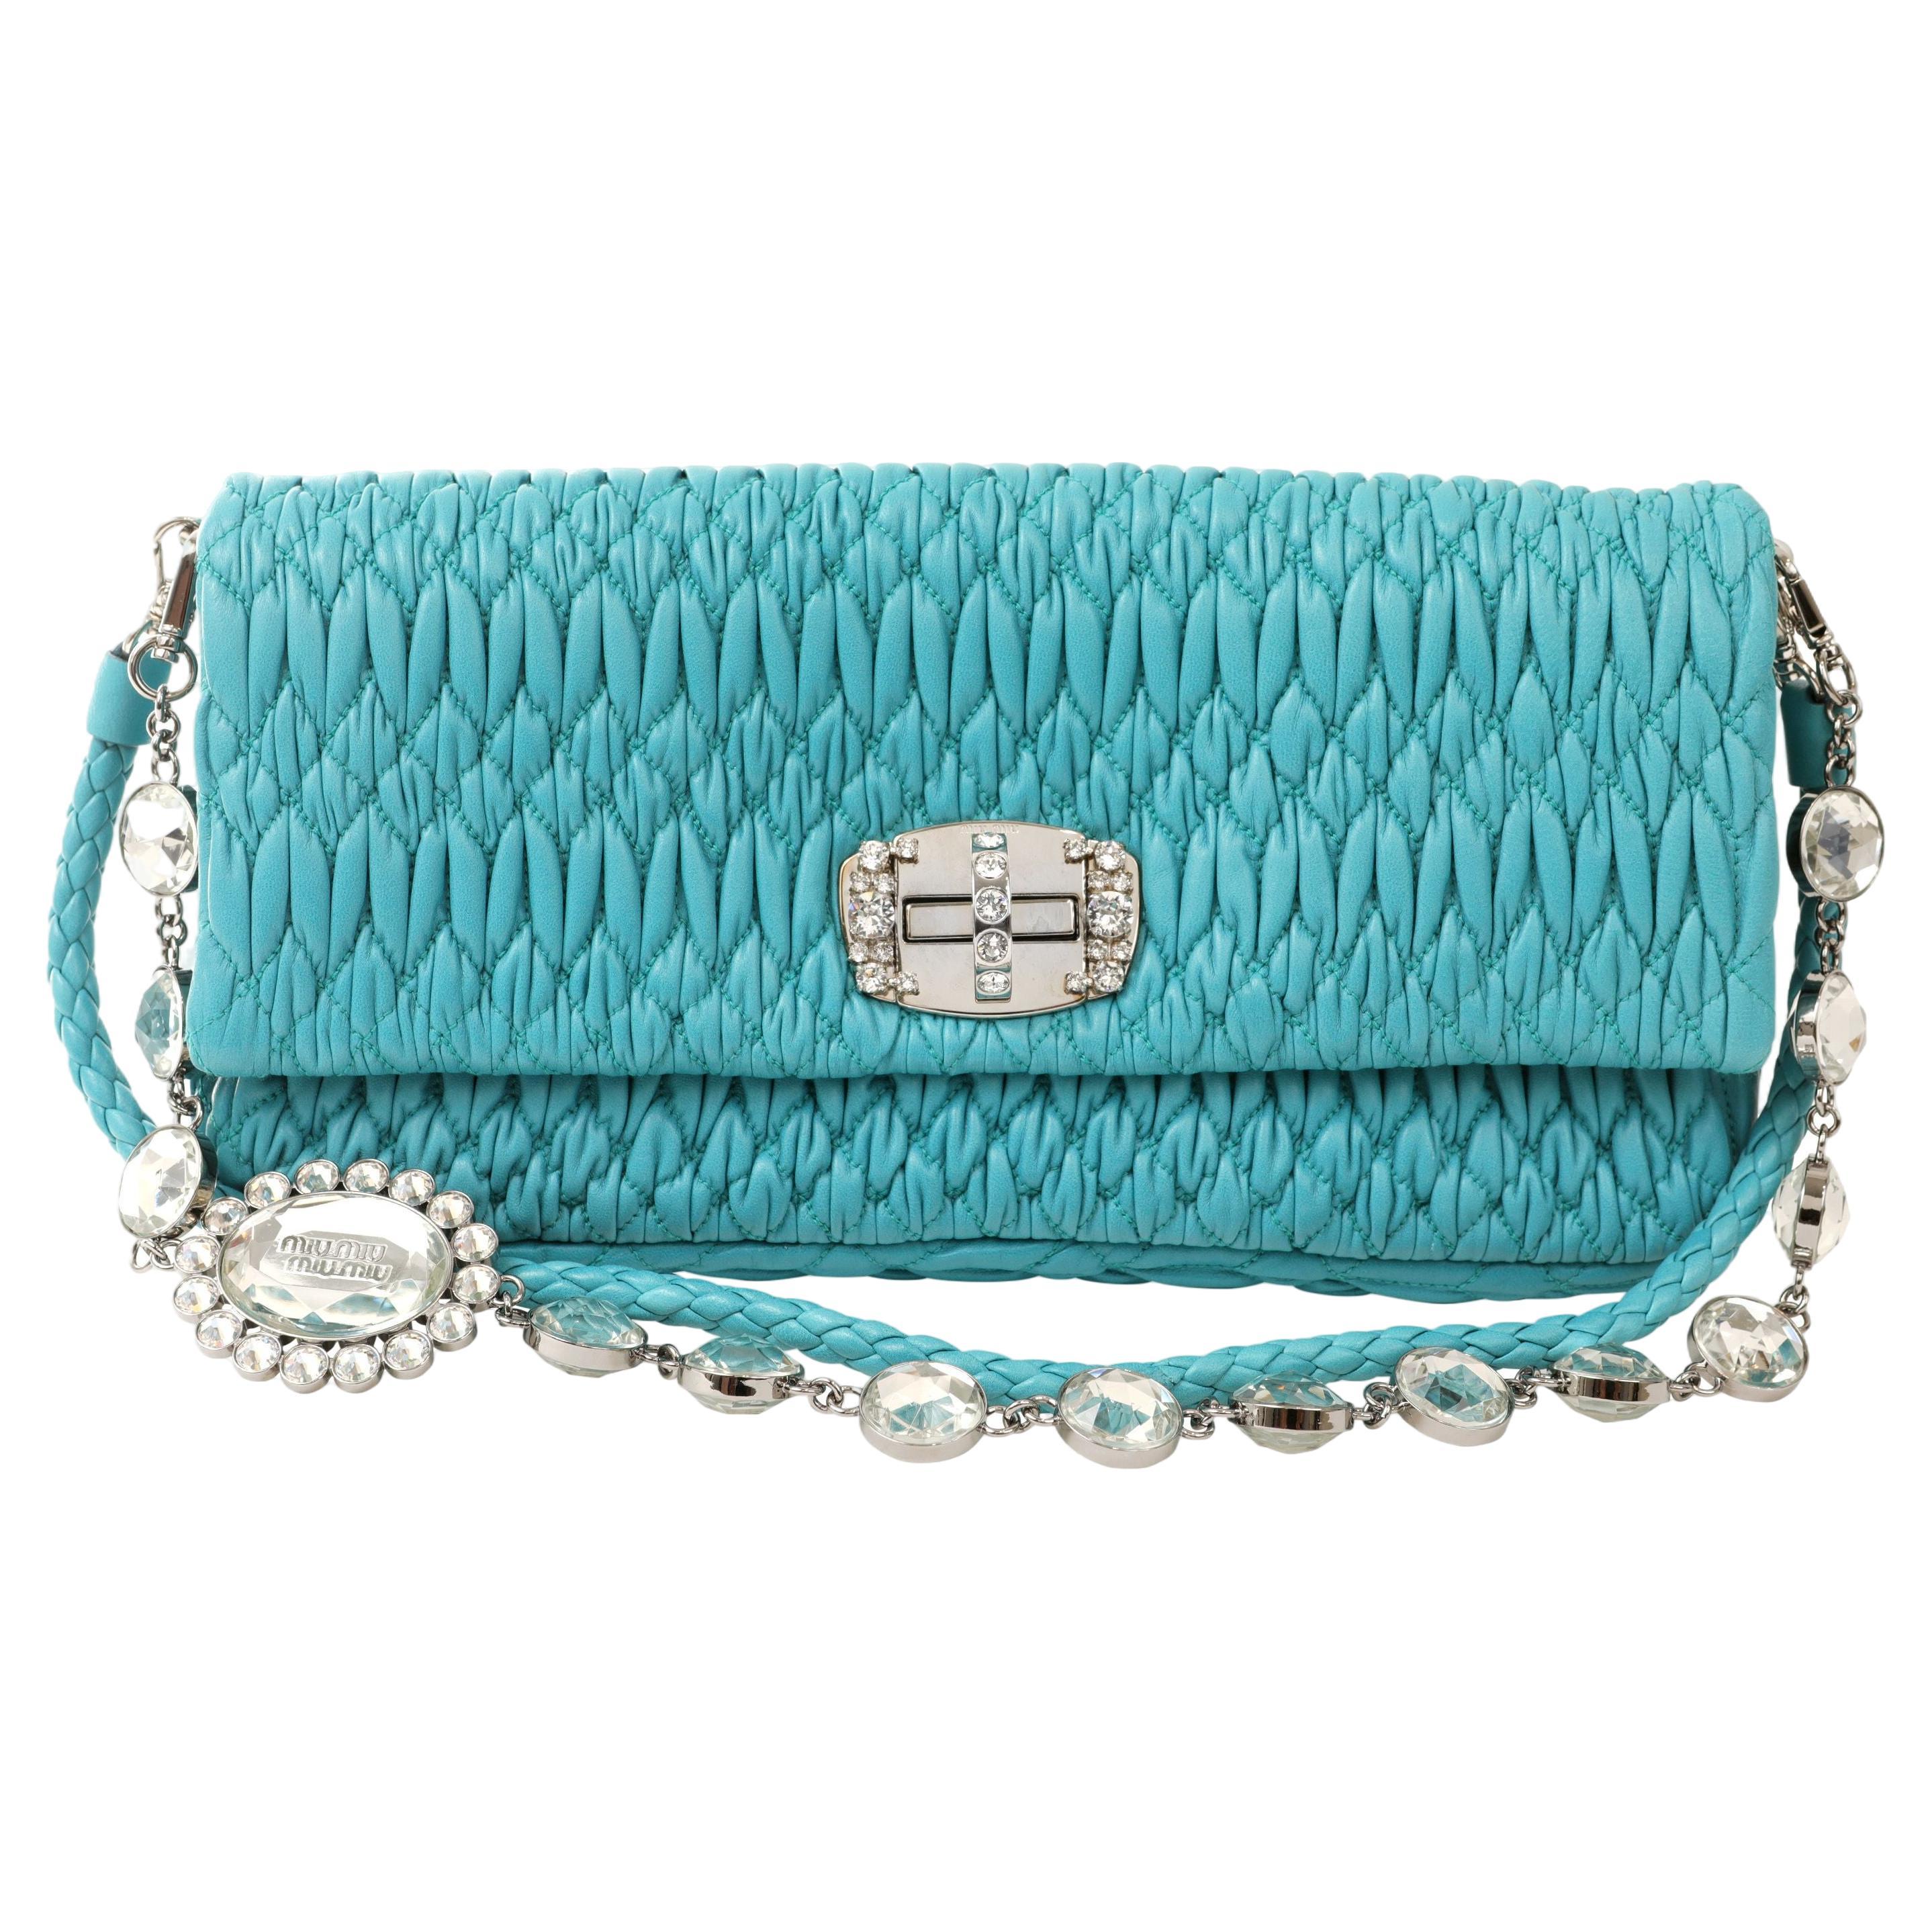 Miu Miu Turquoise Iconic Crystal Cloquè Small Bag with Silver Hardware For Sale